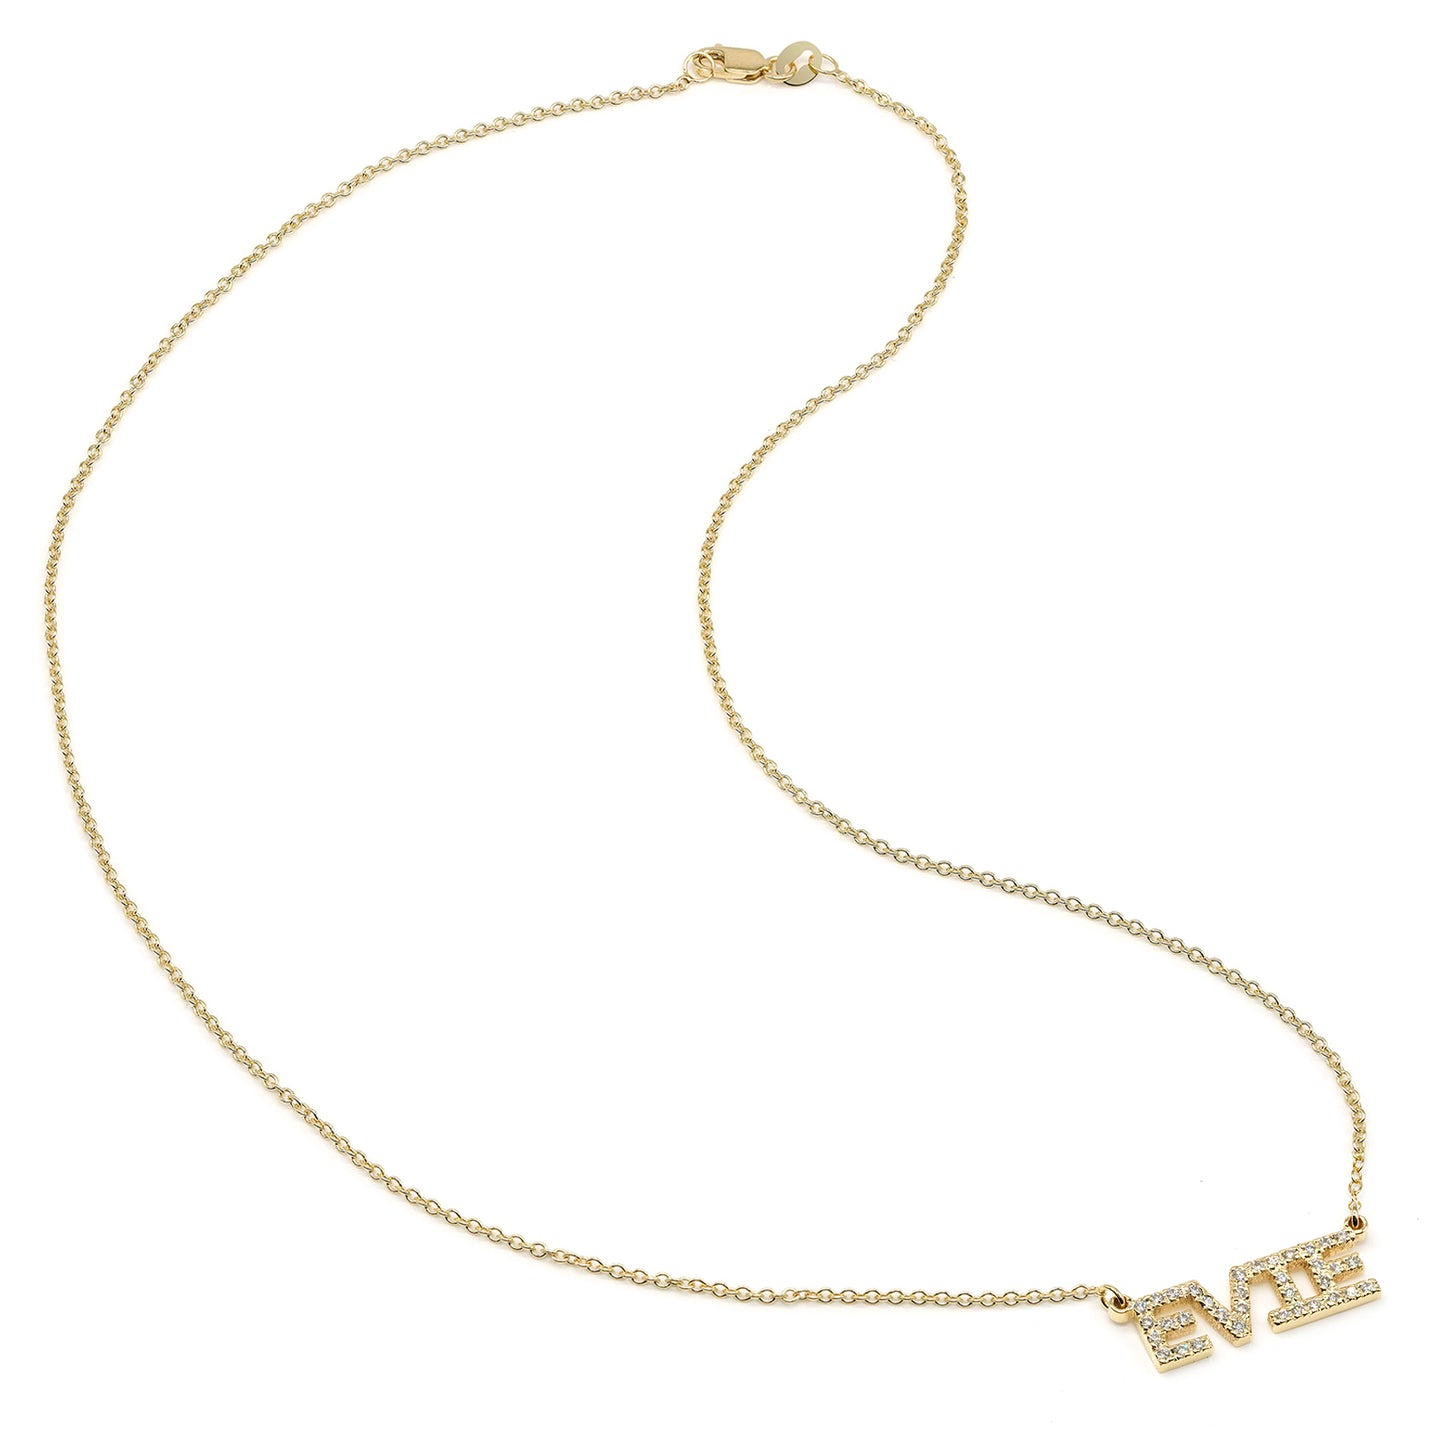 Custom 14K Gold and Diamond Pave Name Necklace